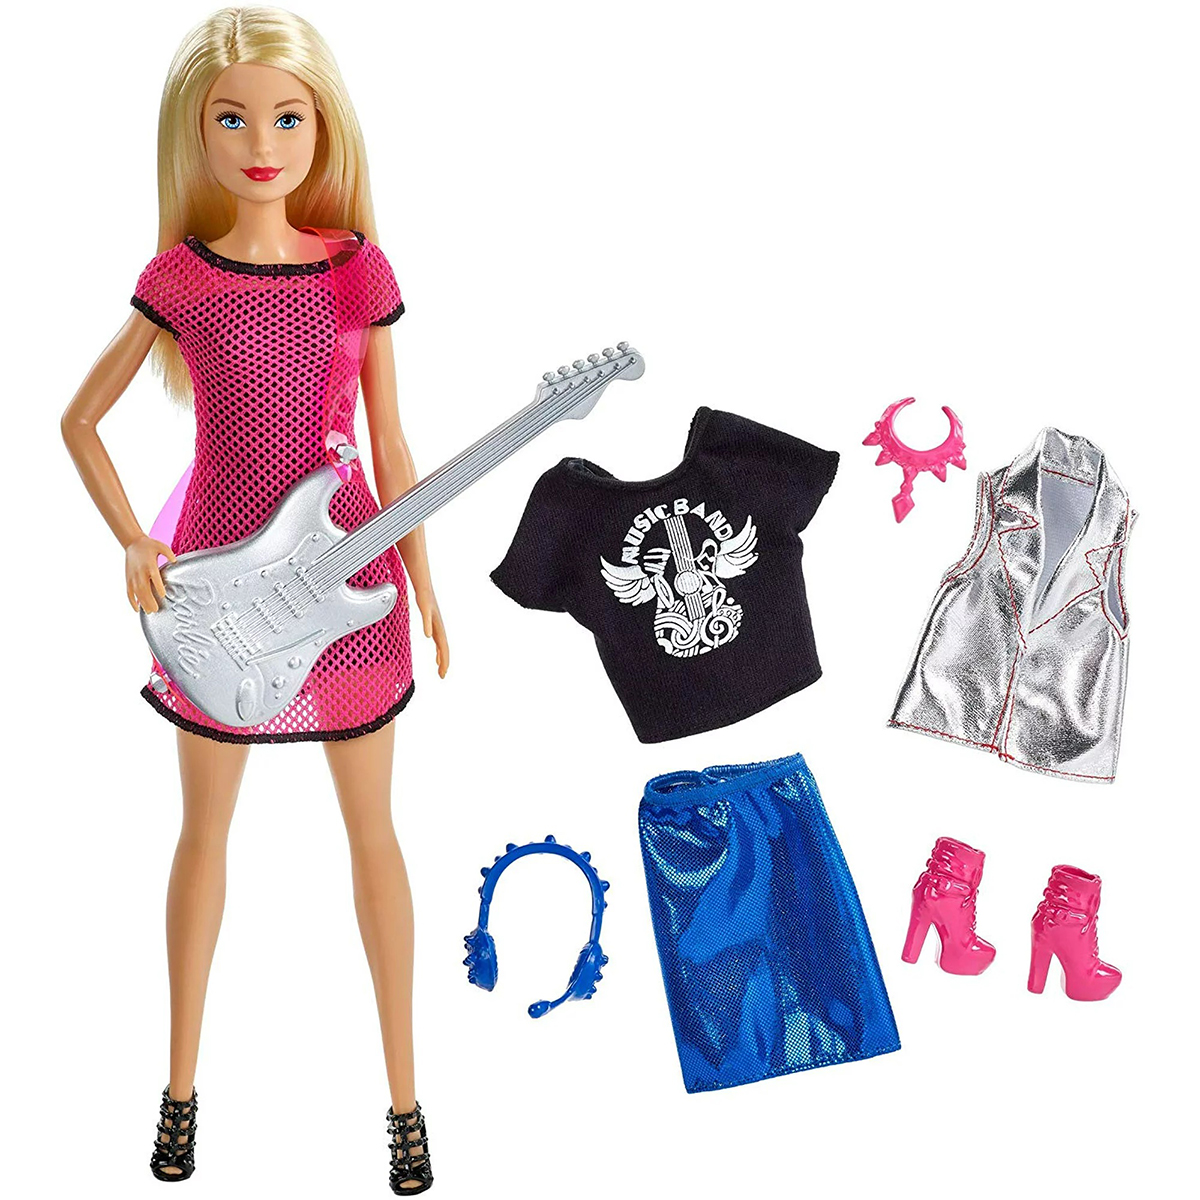 Barbie(R) You Can Be Anything Musician Careers Doll